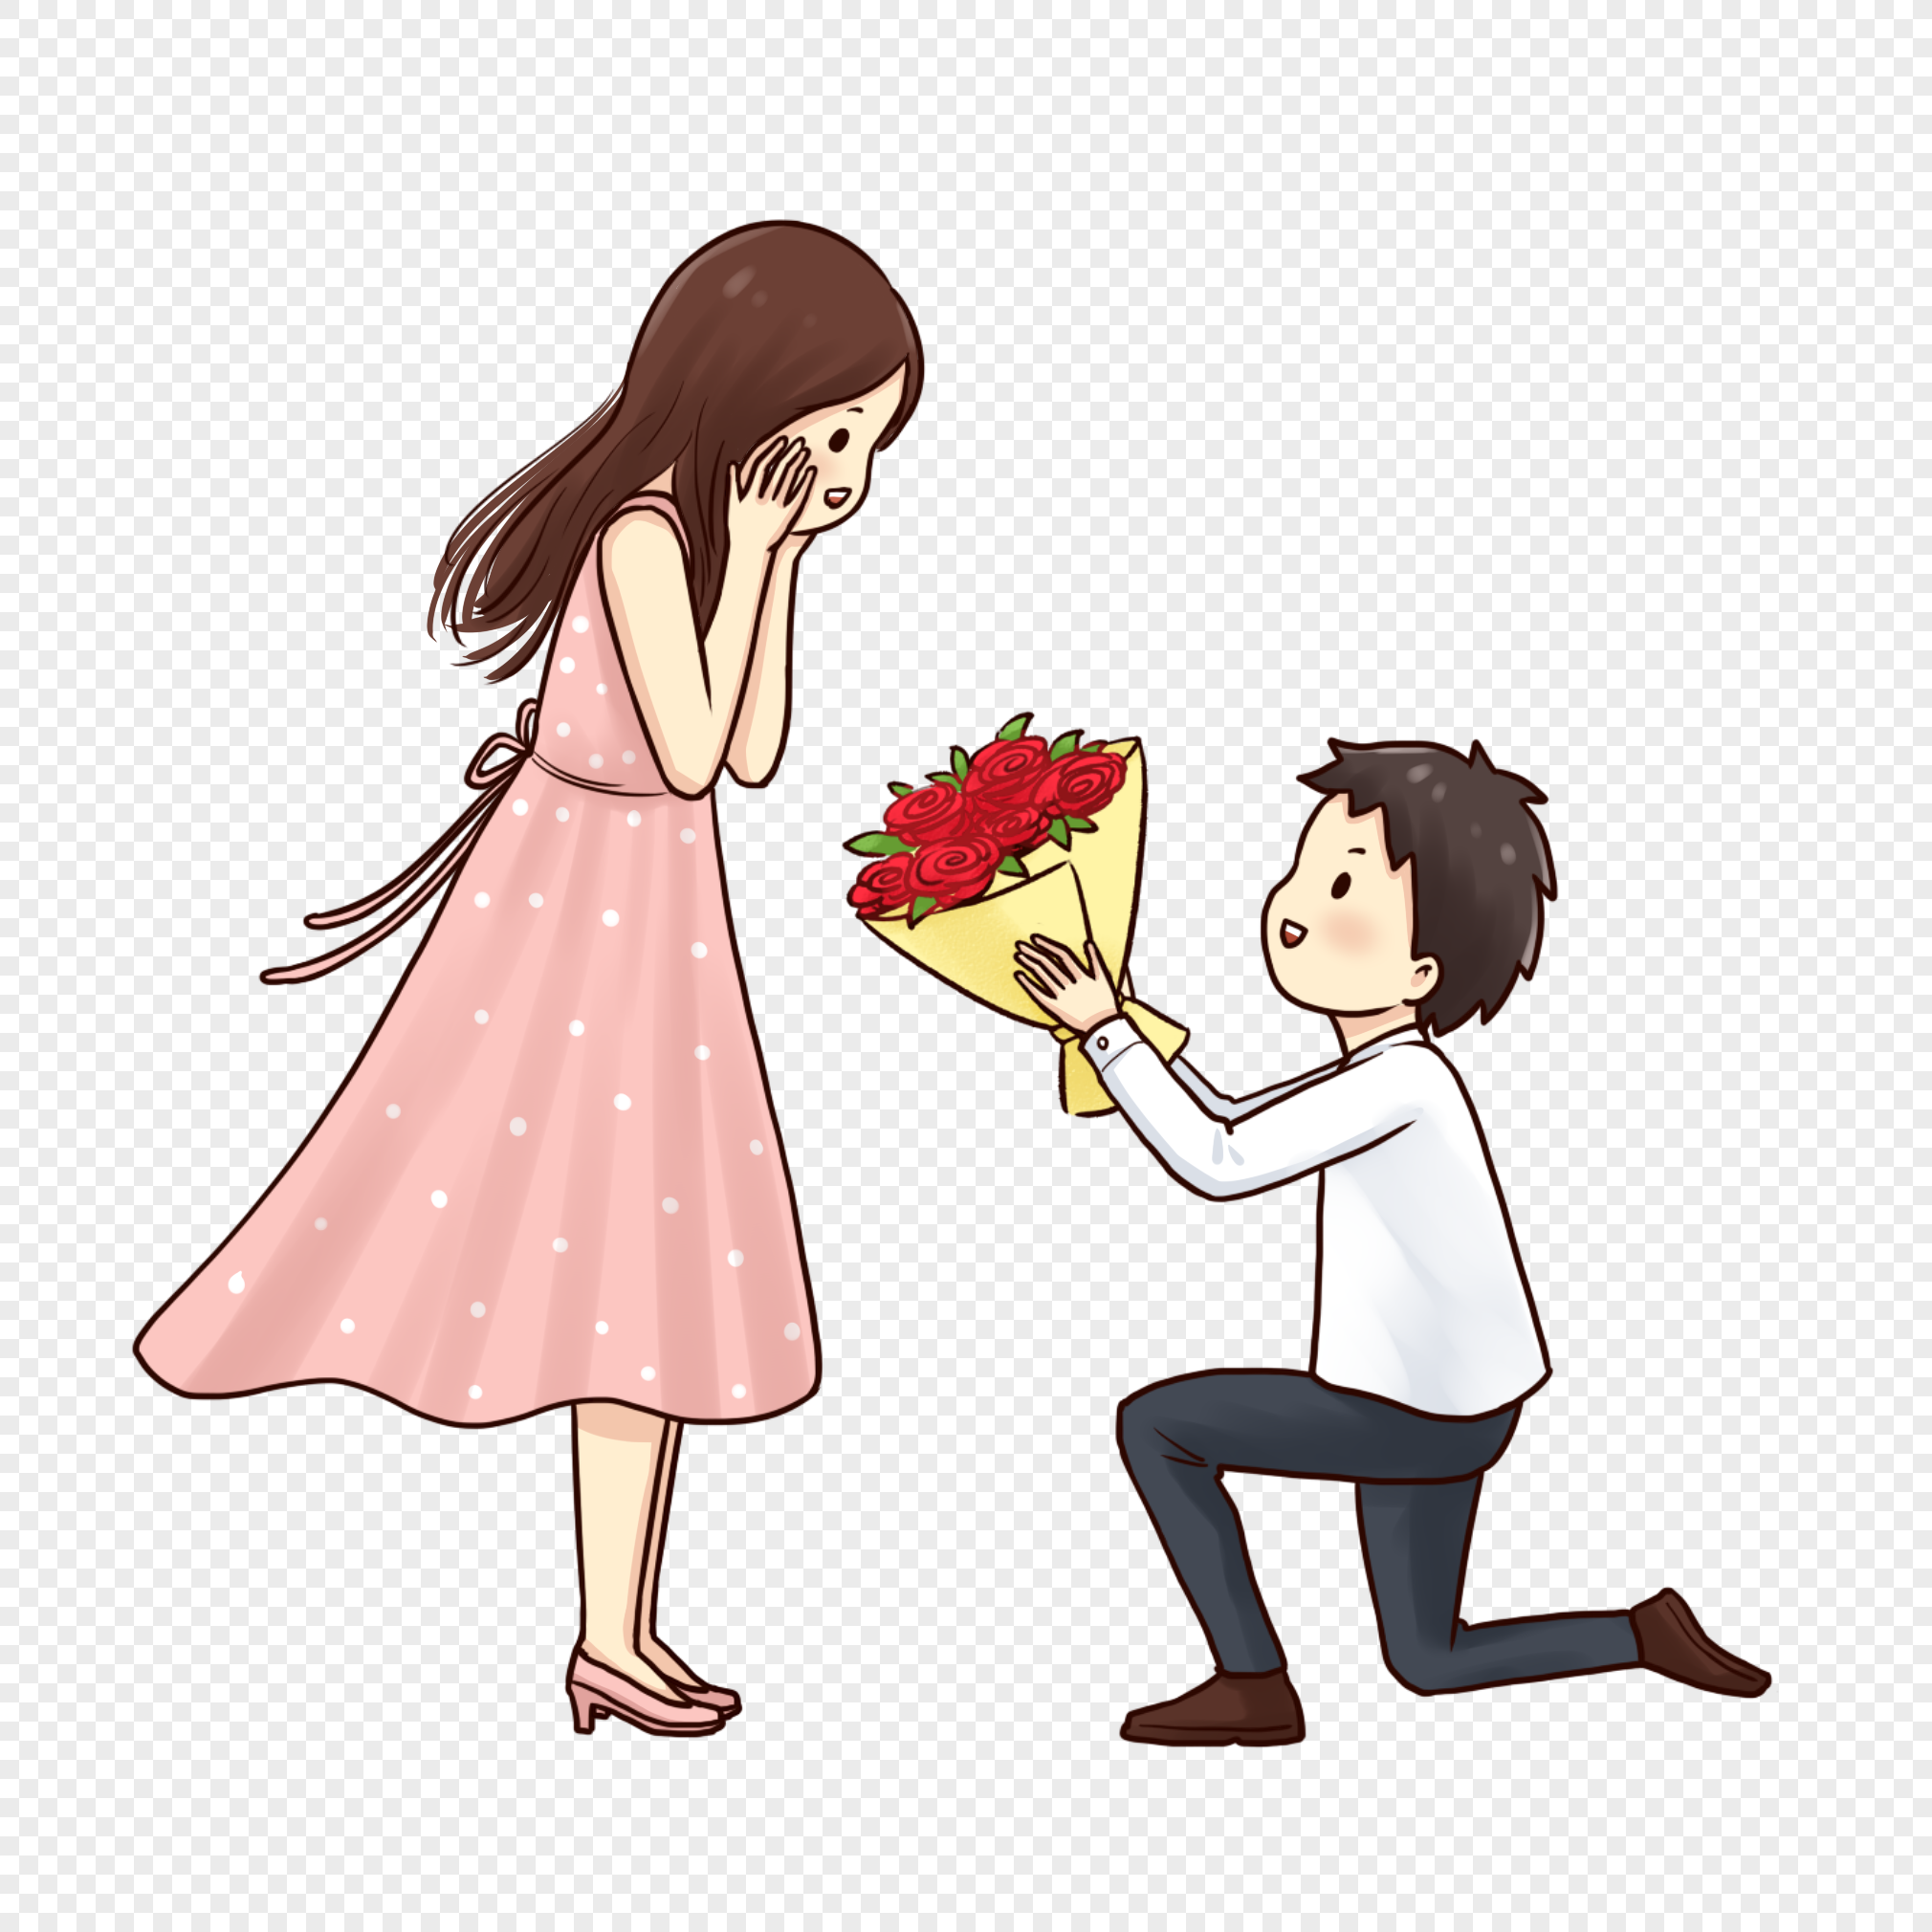 Boys Love Proposal Images, HD Pictures For Free Vectors Download -  